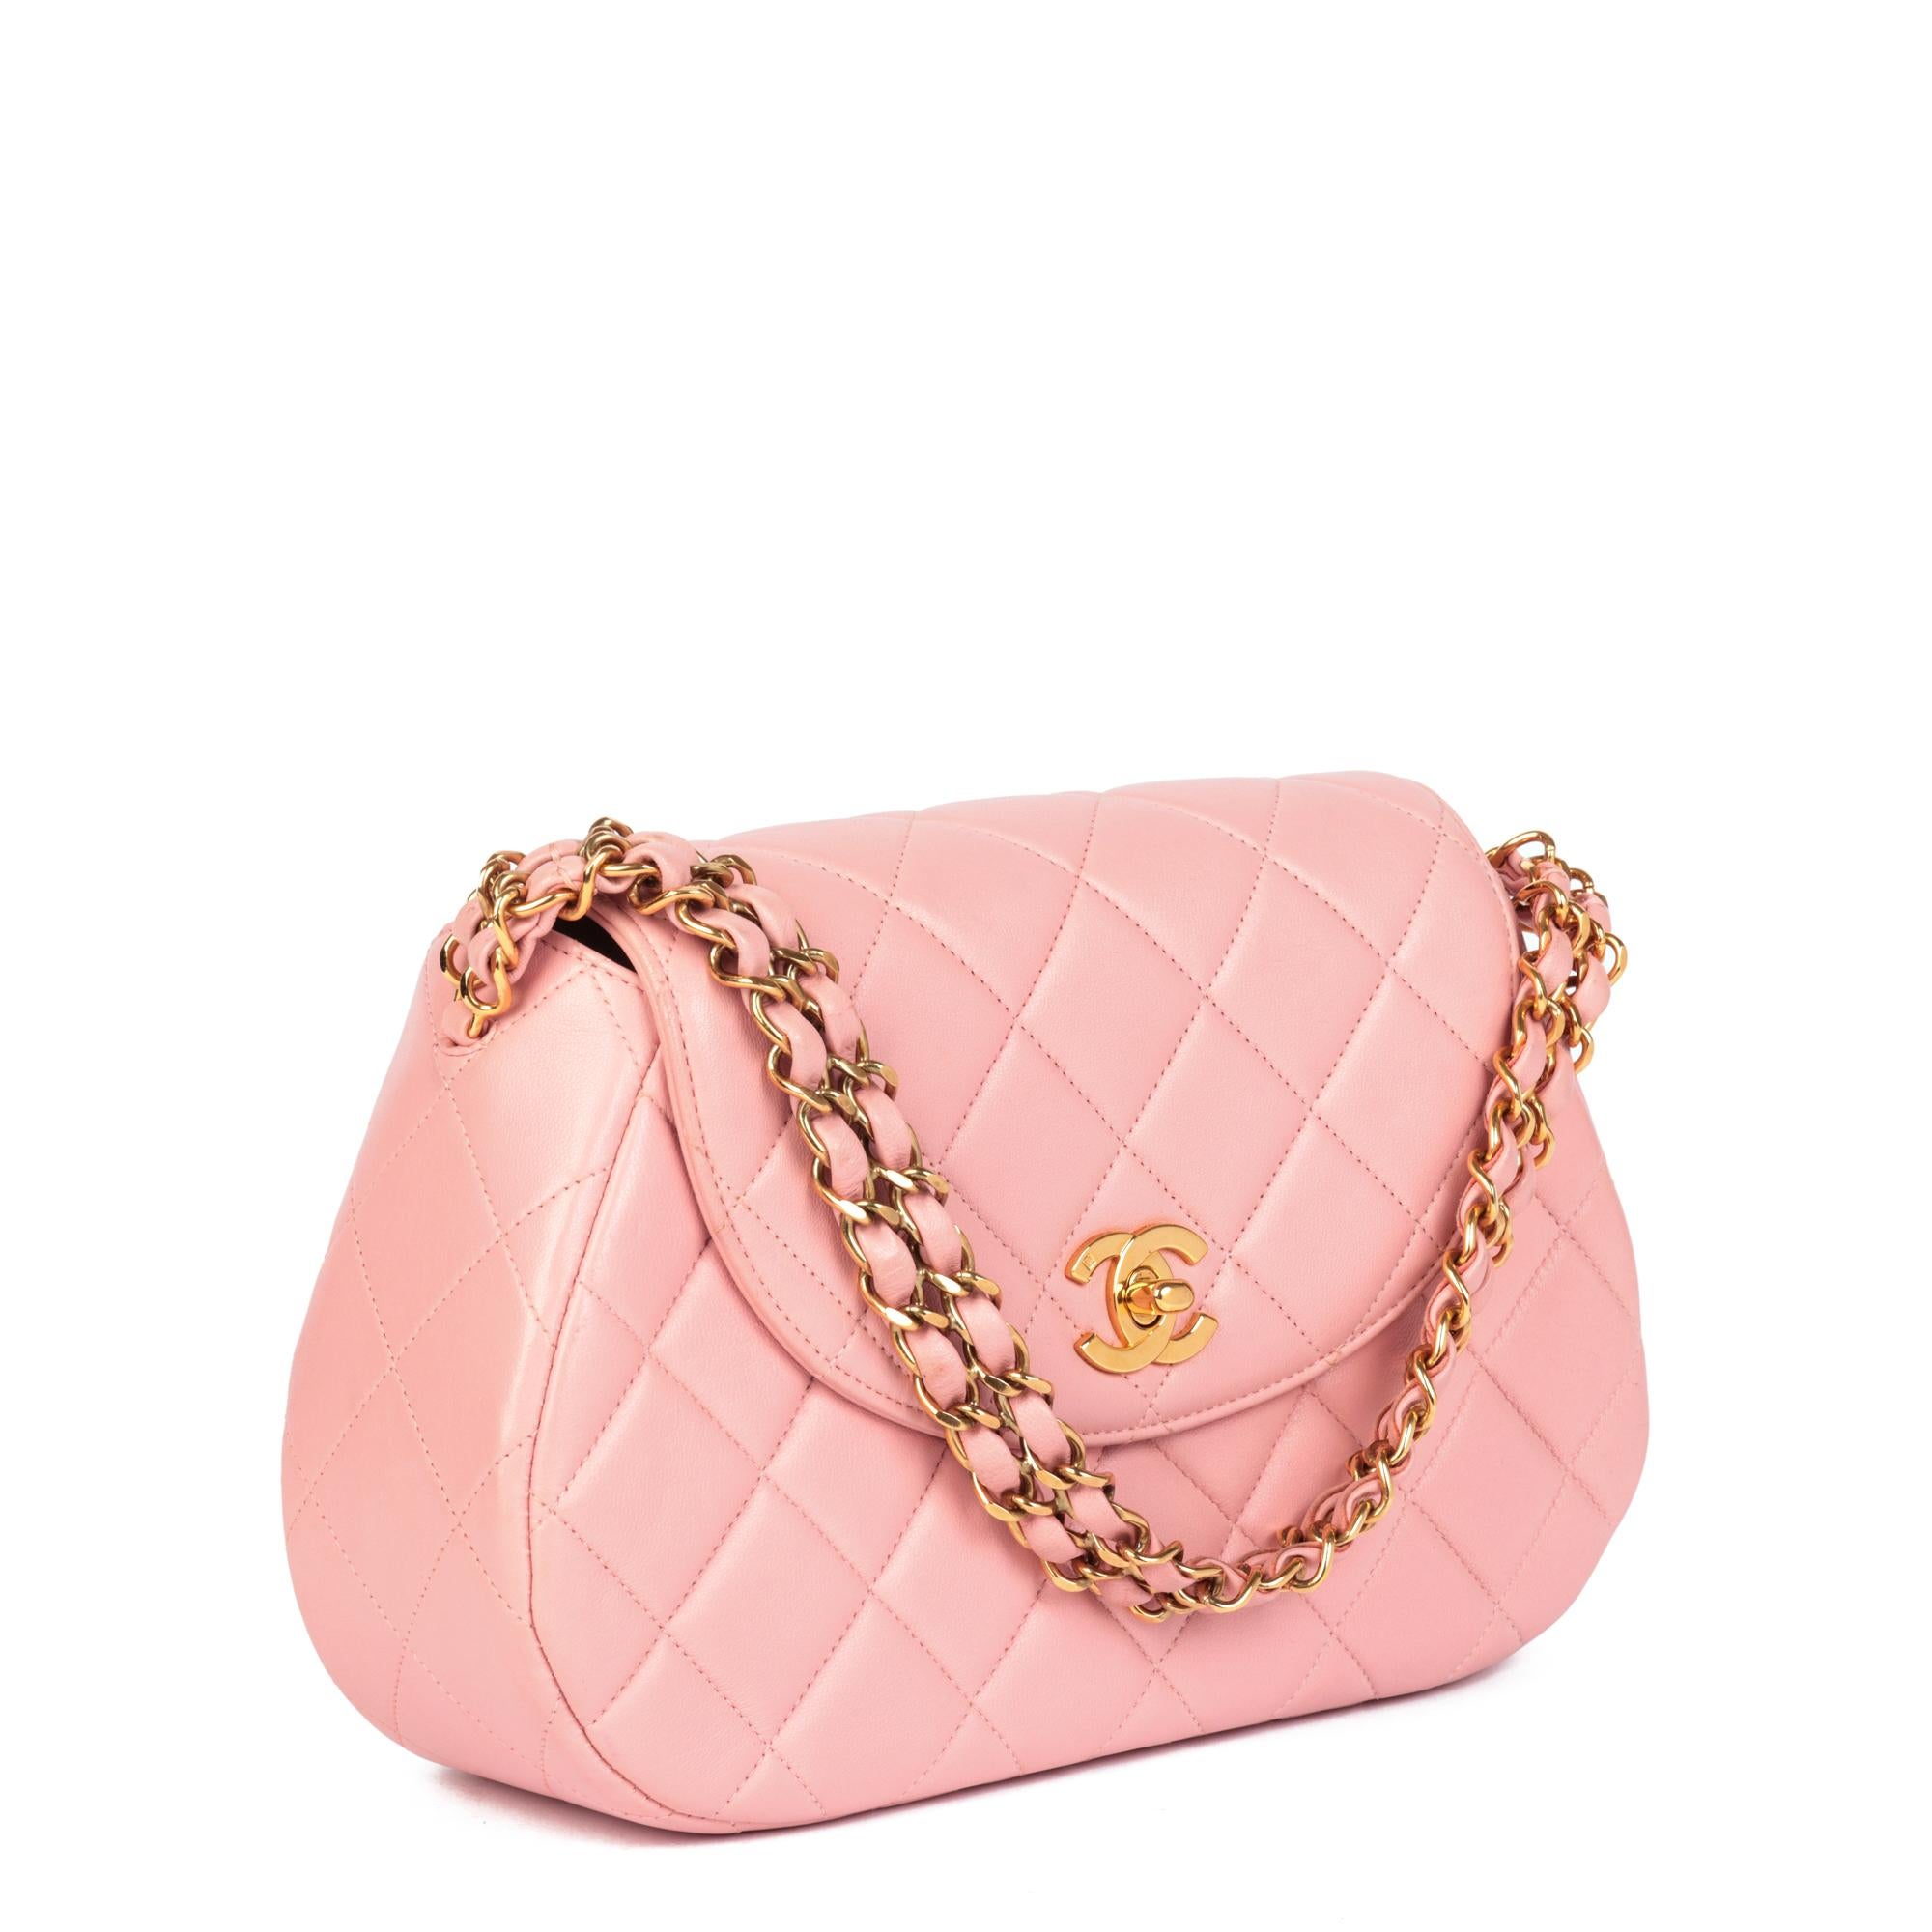 CHANEL
Pink Quilted Lambskin Leather Small Top Handle Classic Single Flap Bag

Serial Number: 4023840
Age (Circa): 1996
Accompanied By: Chanel Dust Bag, Care Booklet, Authenticity Card
Authenticity Details: Authenticity Card, Serial Sticker (Made in